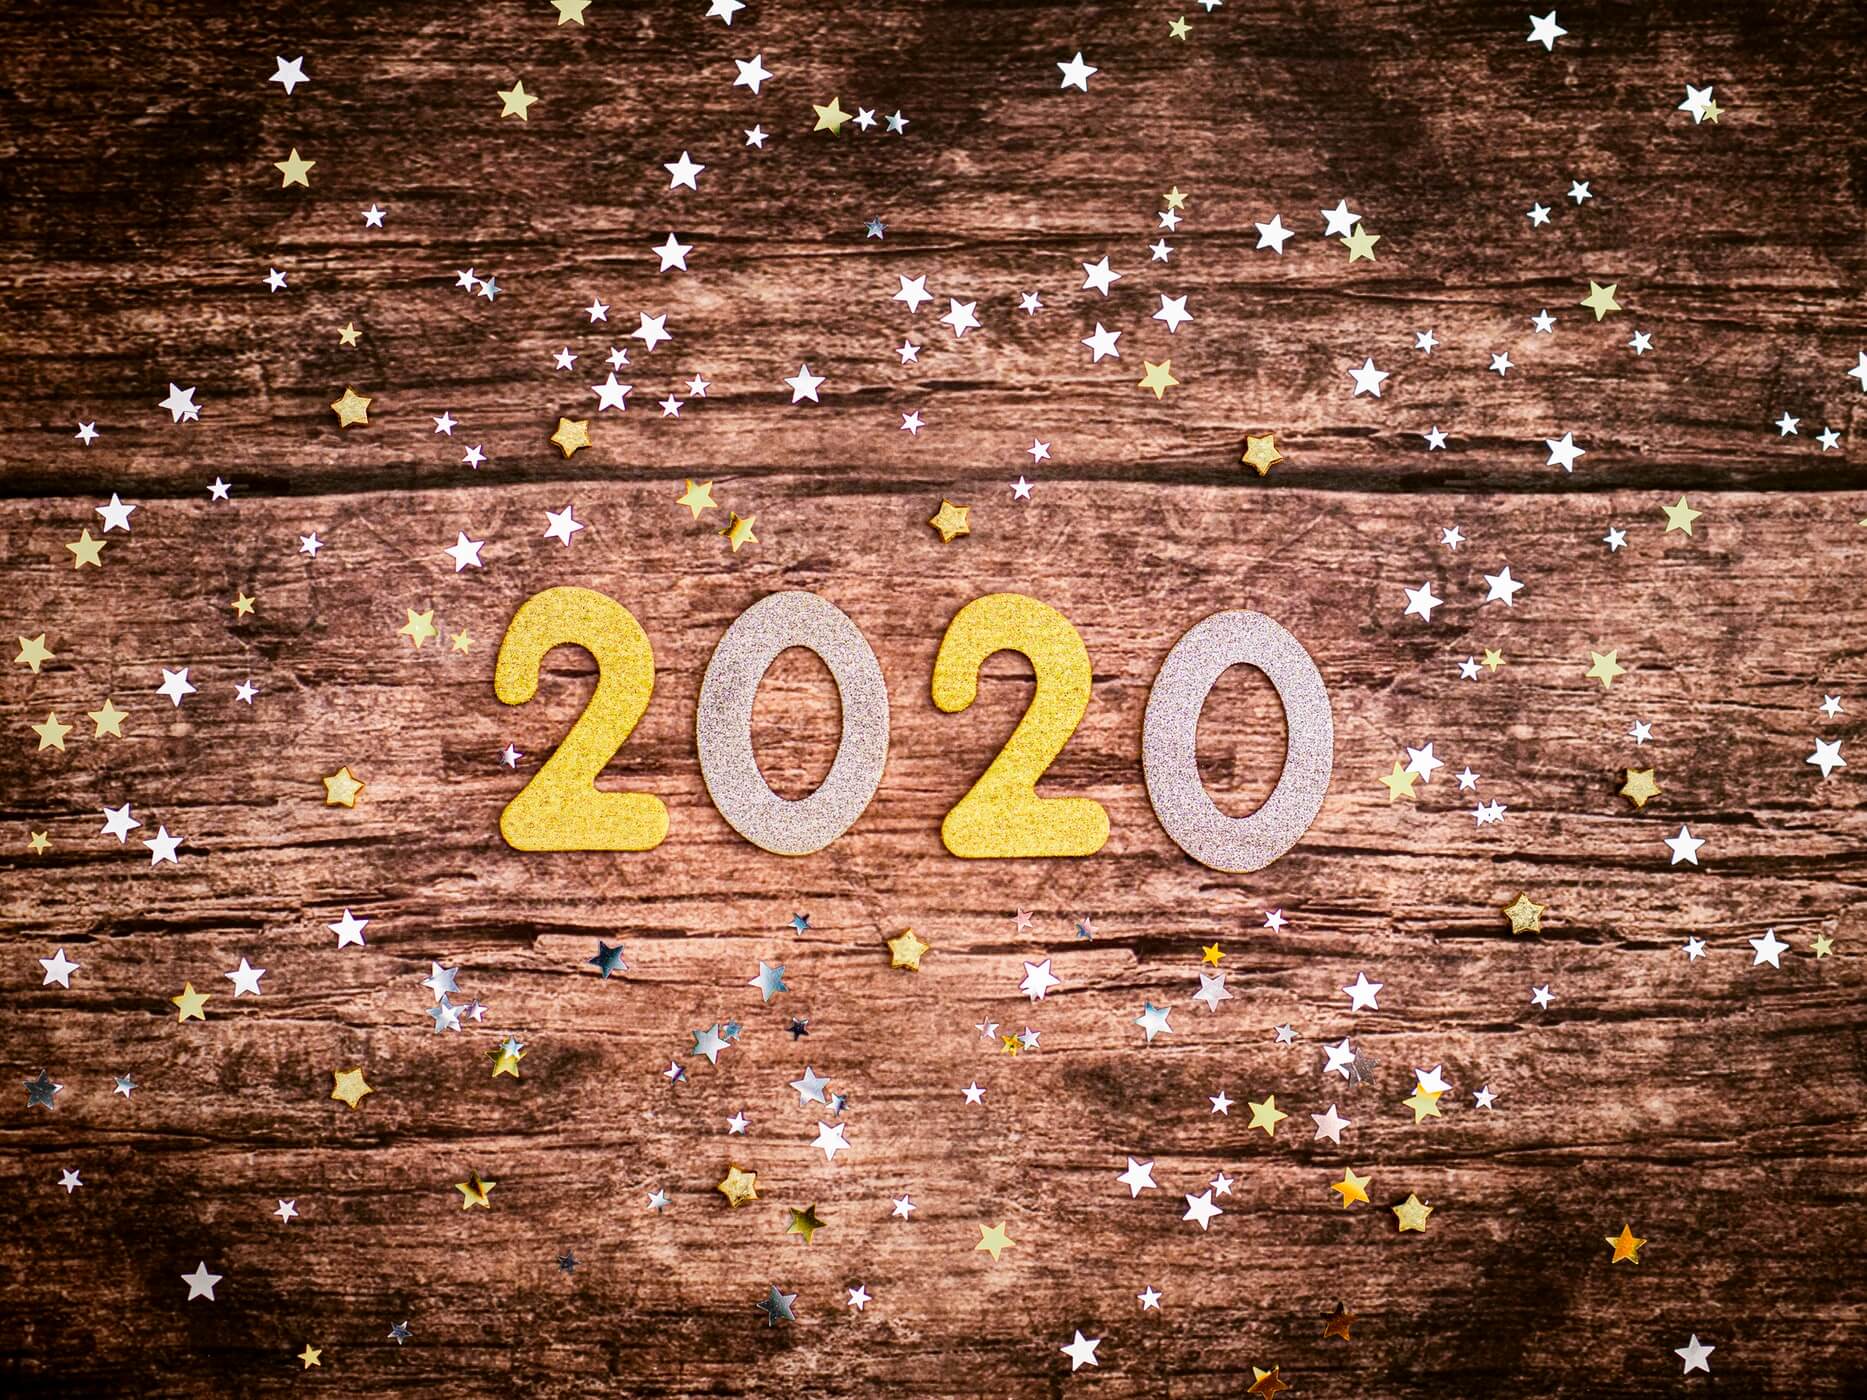 Financial resolutions for 2020